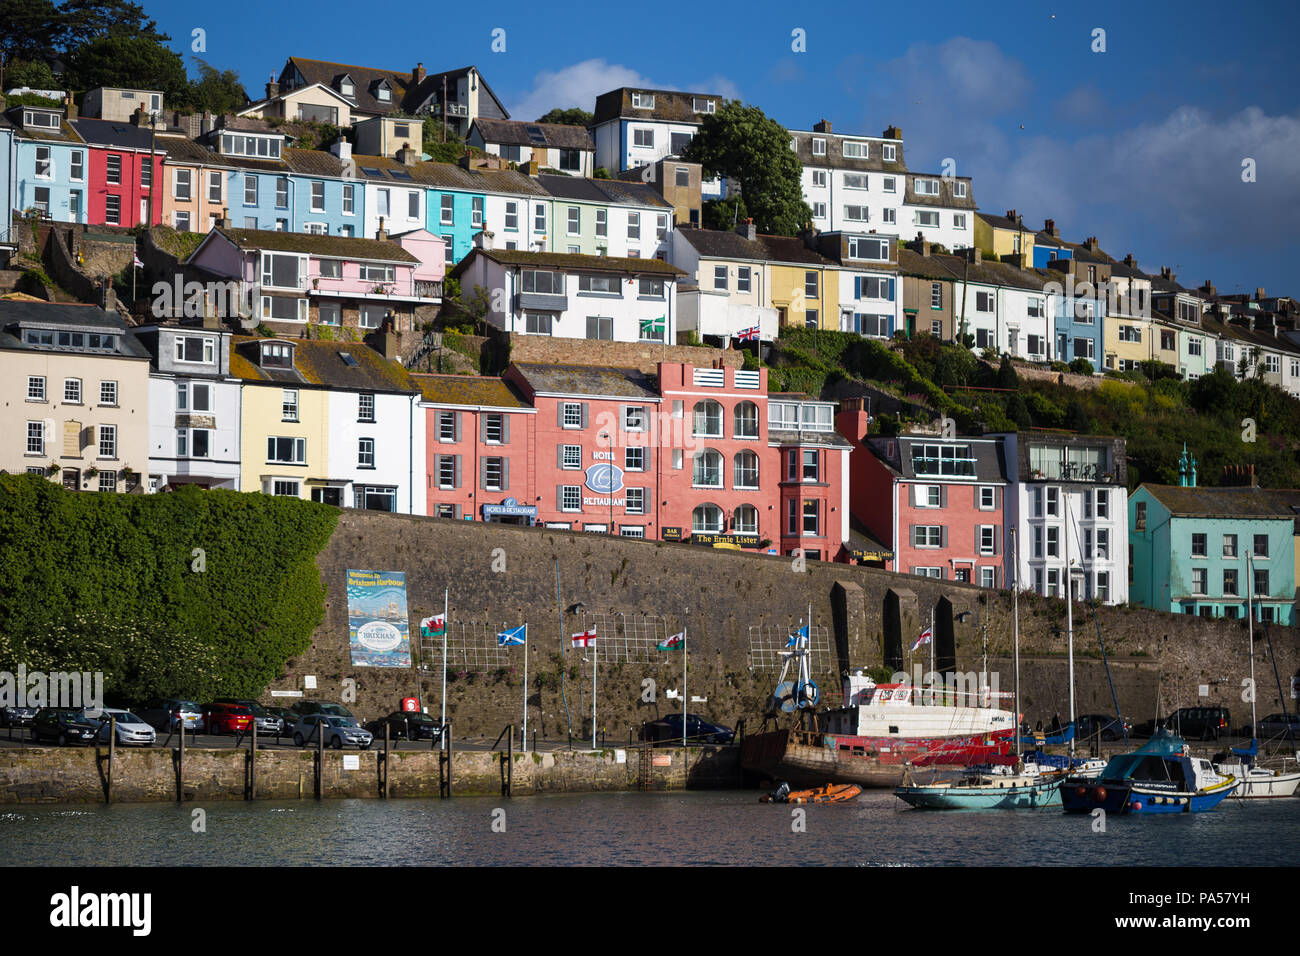 Colourful Seaside Homes Houses At Brixham Devon With Boats On